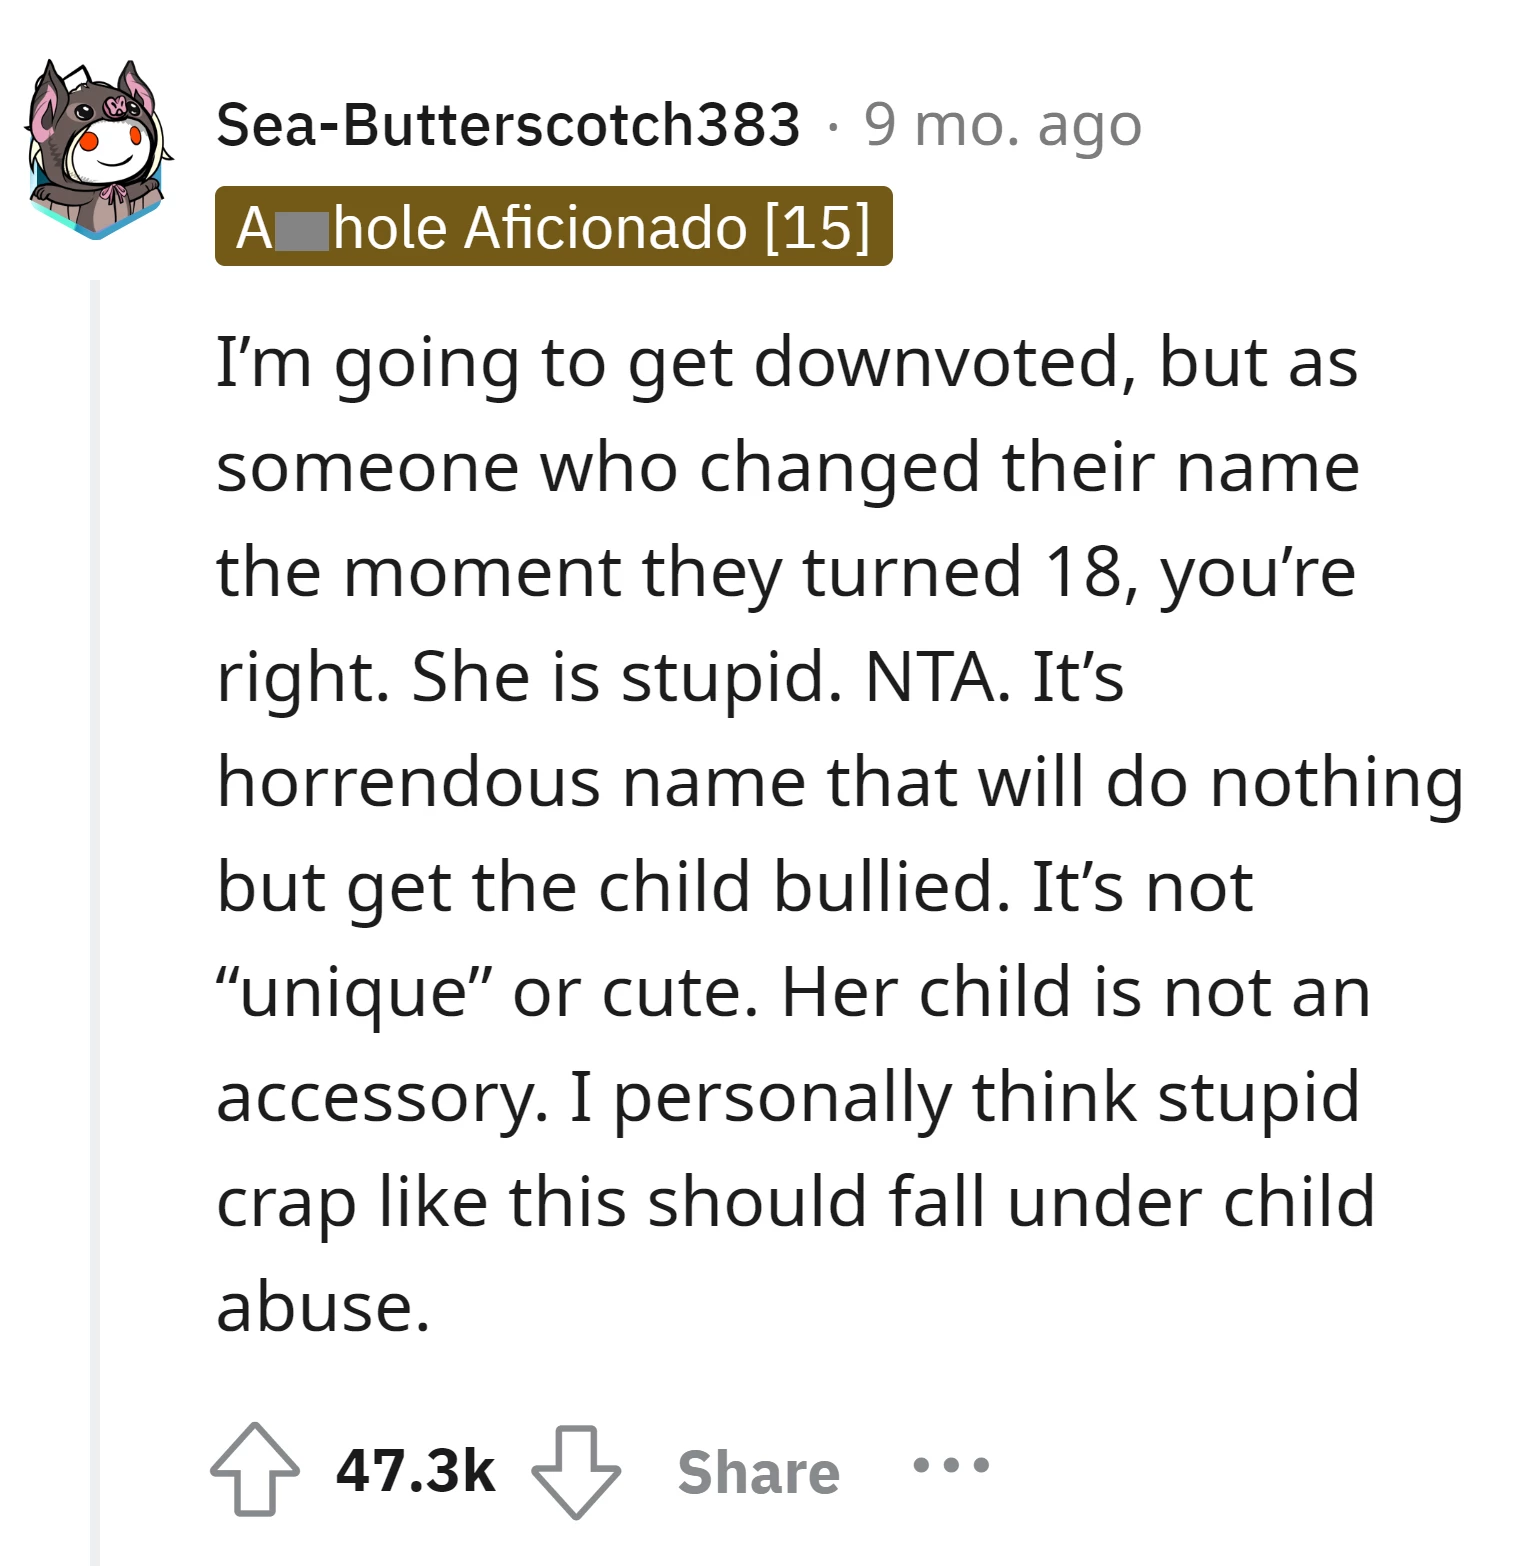 Commenter agrees with OP that name is "horrendous"